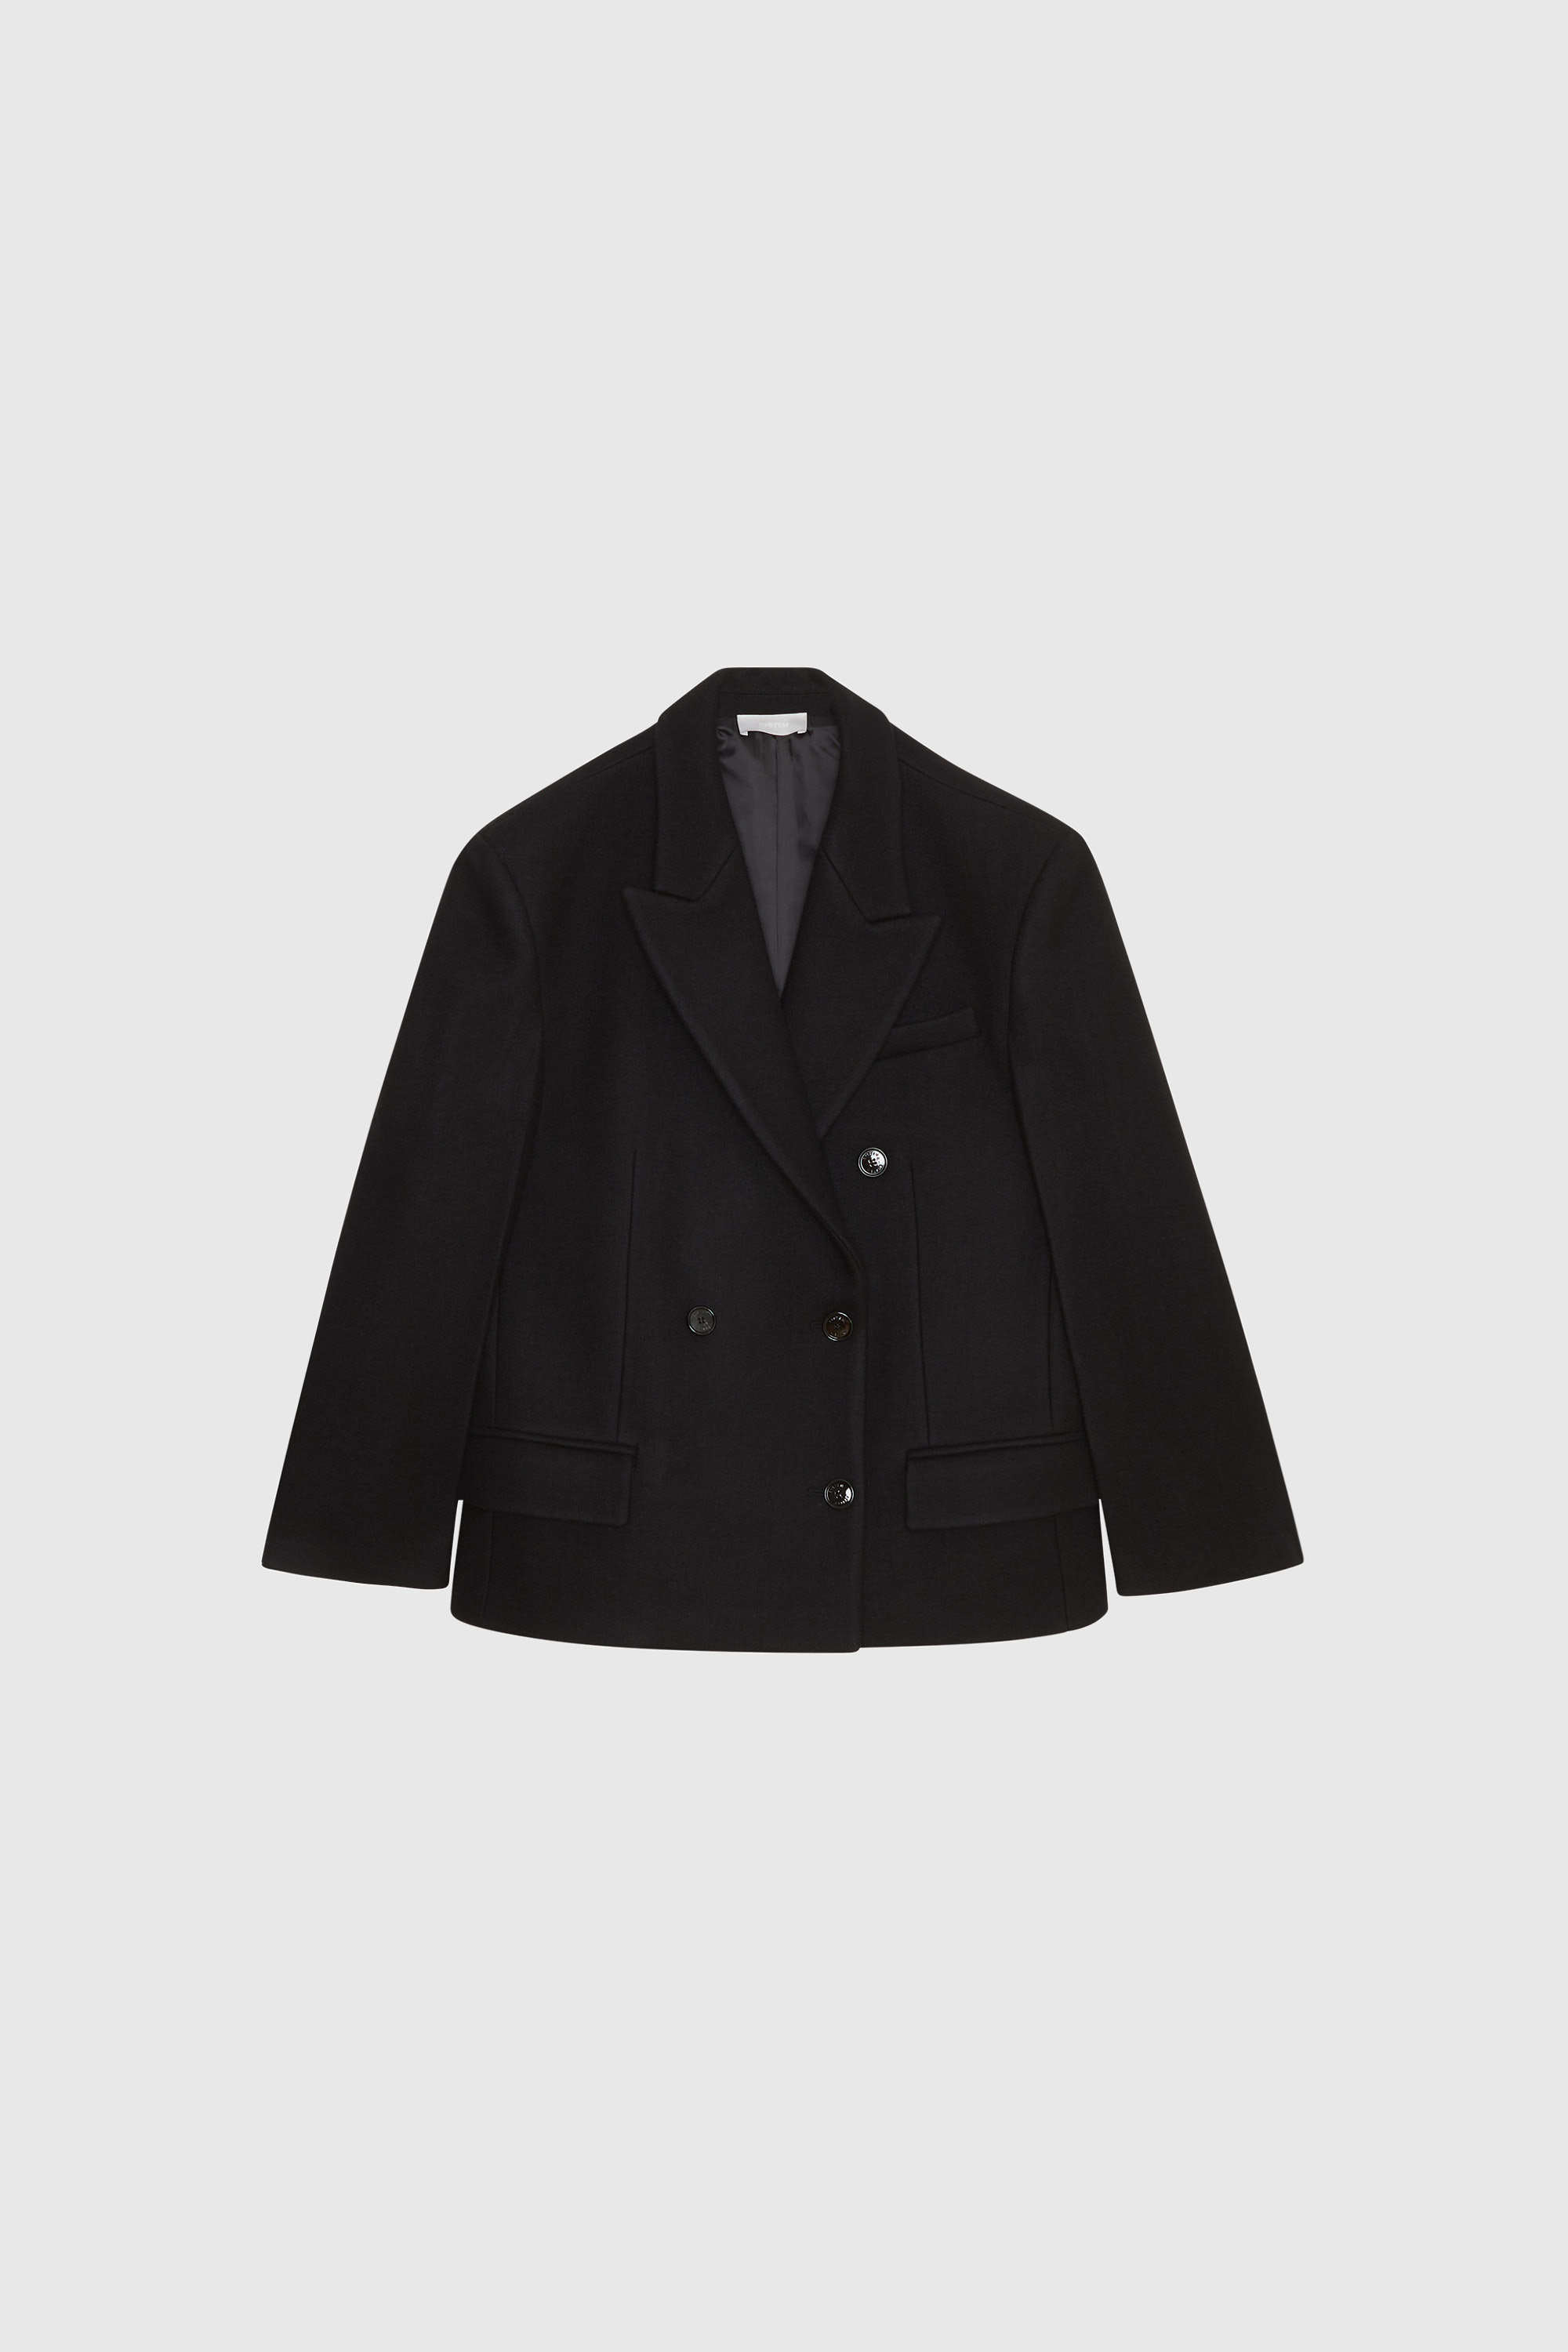 SYSTEM Cropped Double Jacket Black | WoodWood.com